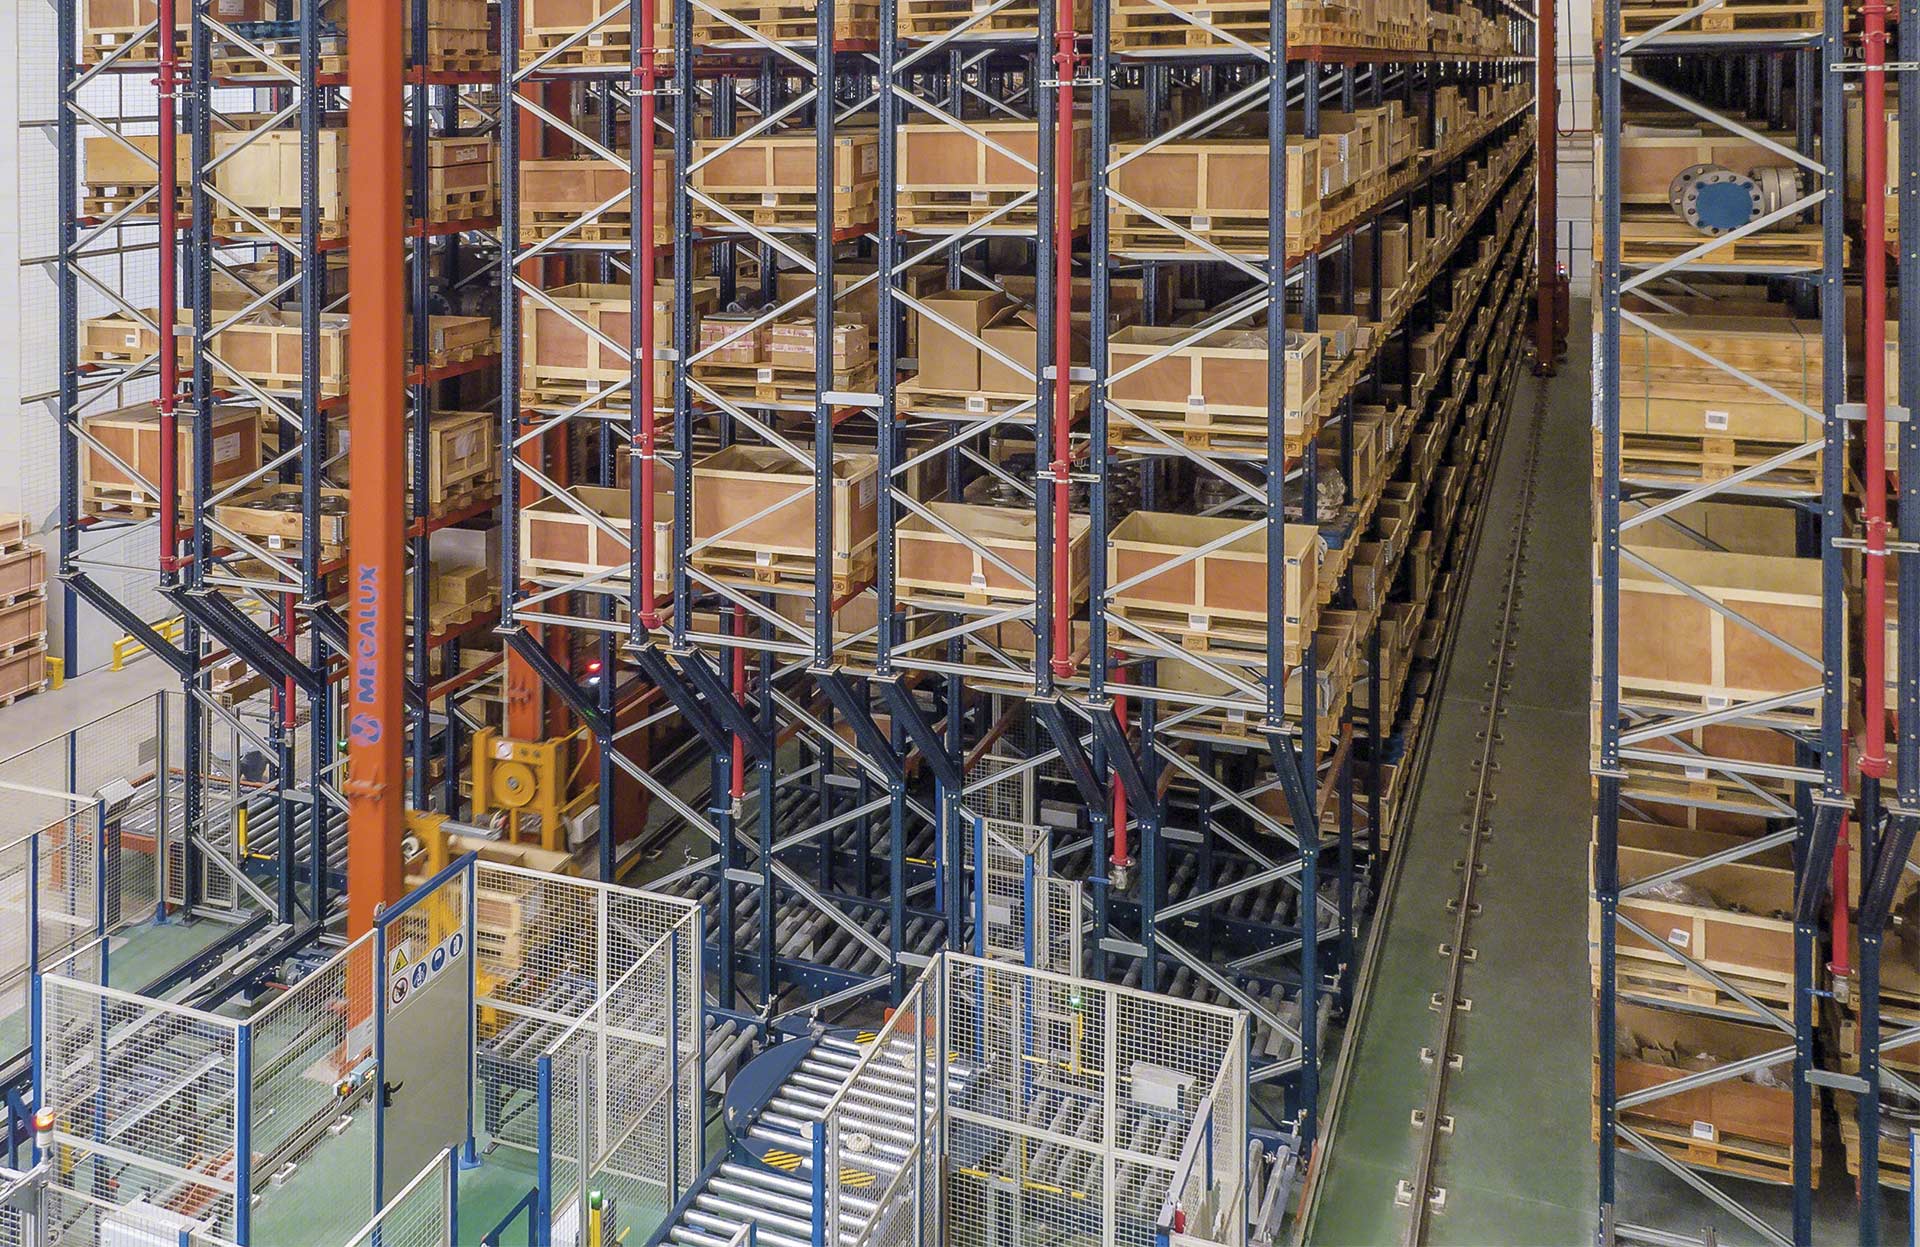 Stacker cranes can operate with double-deep racking